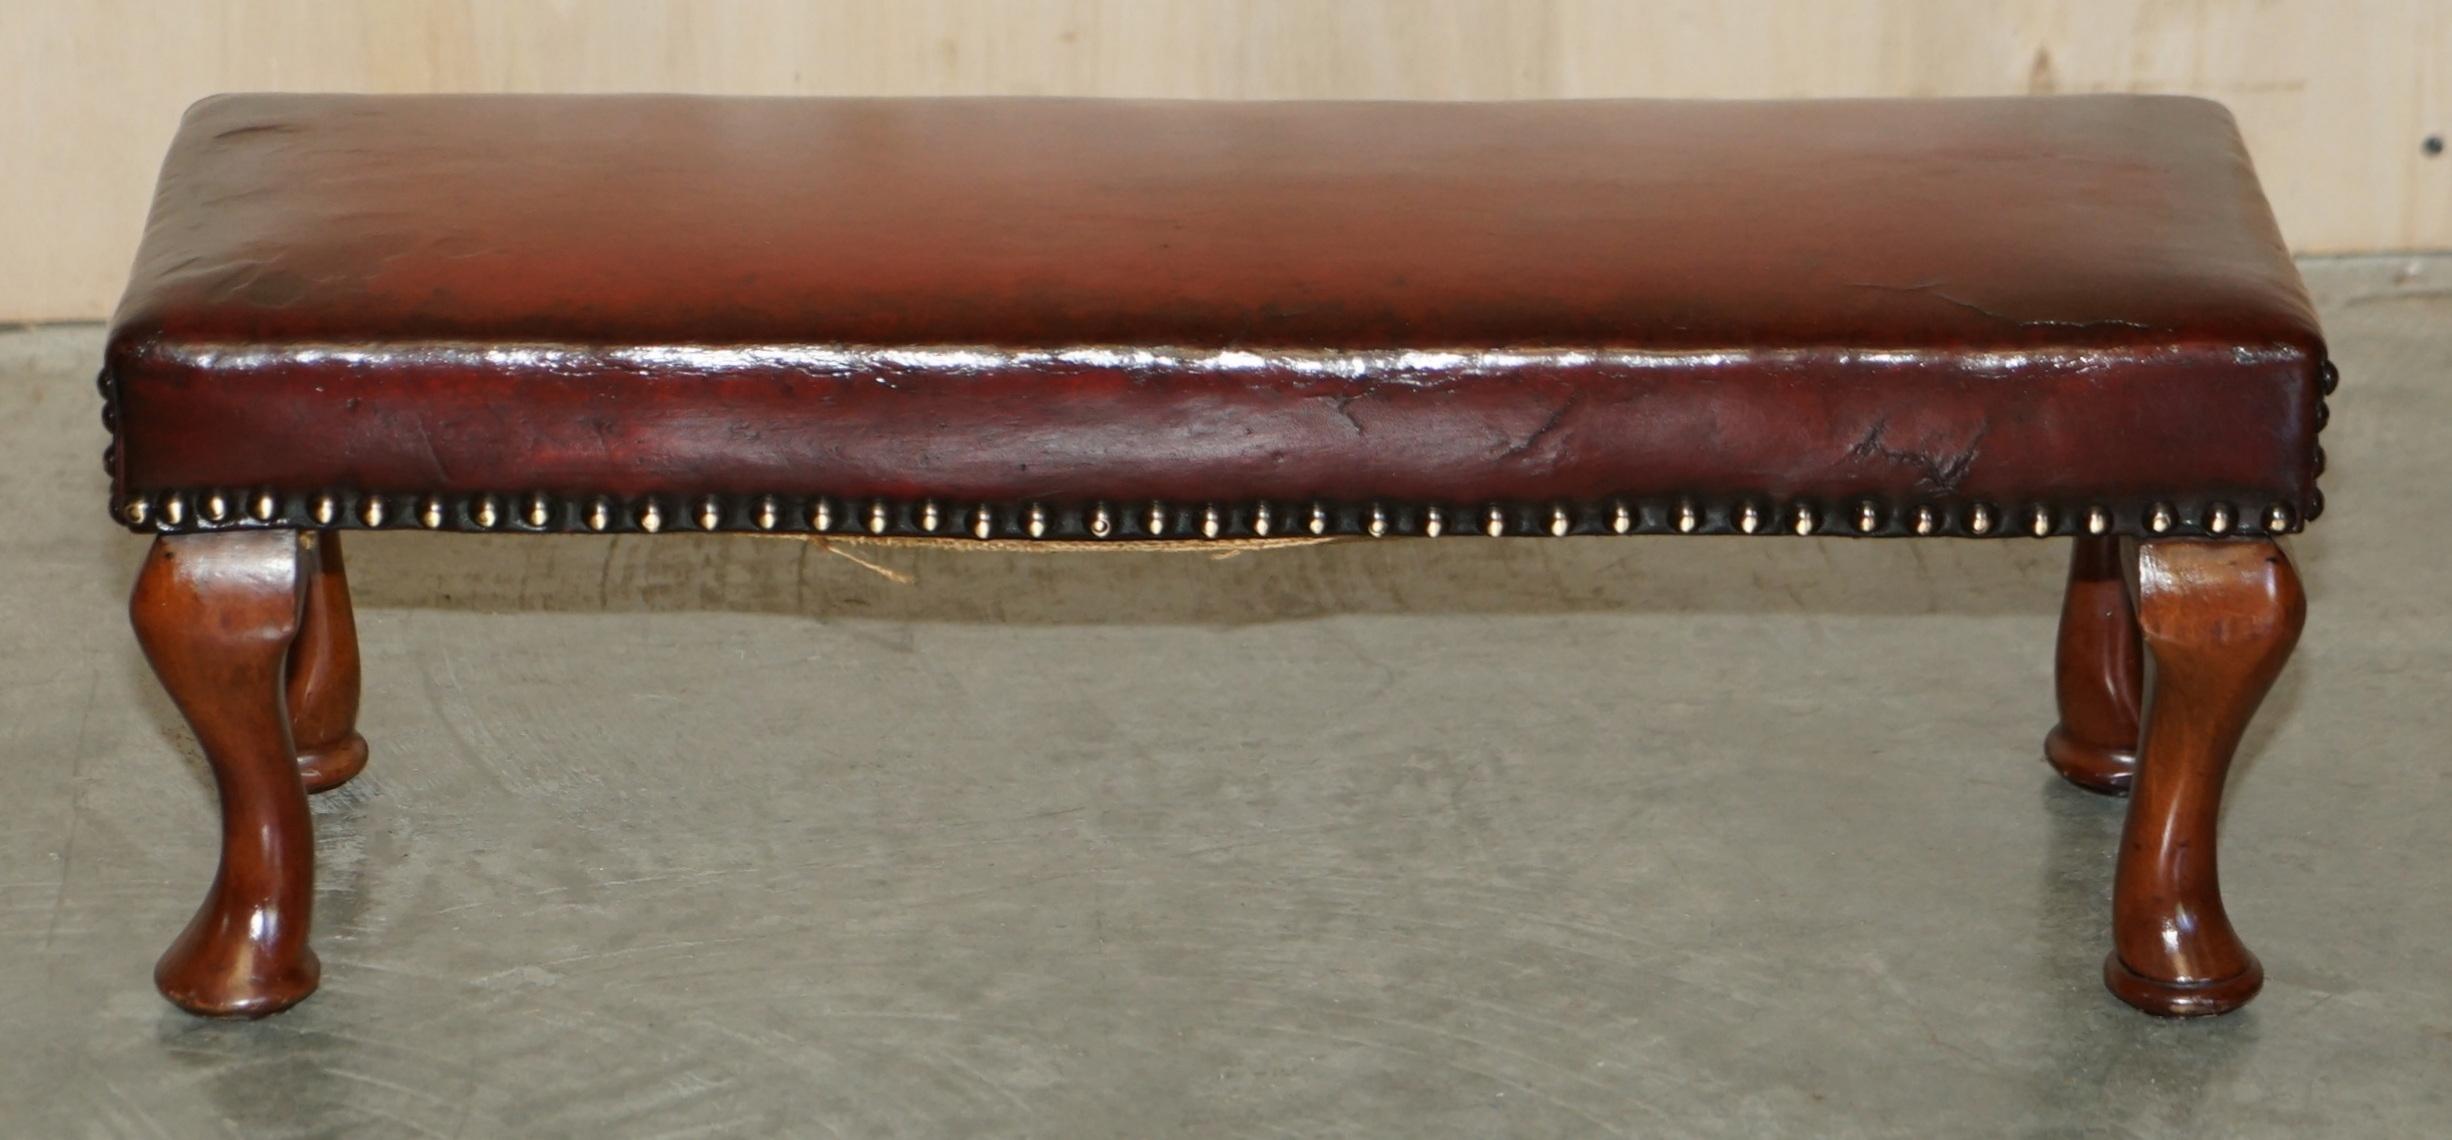 Antique Cabriolet Leg Fully Restored Hand Dyed Bordeaux Leather Tufted Footstool For Sale 2